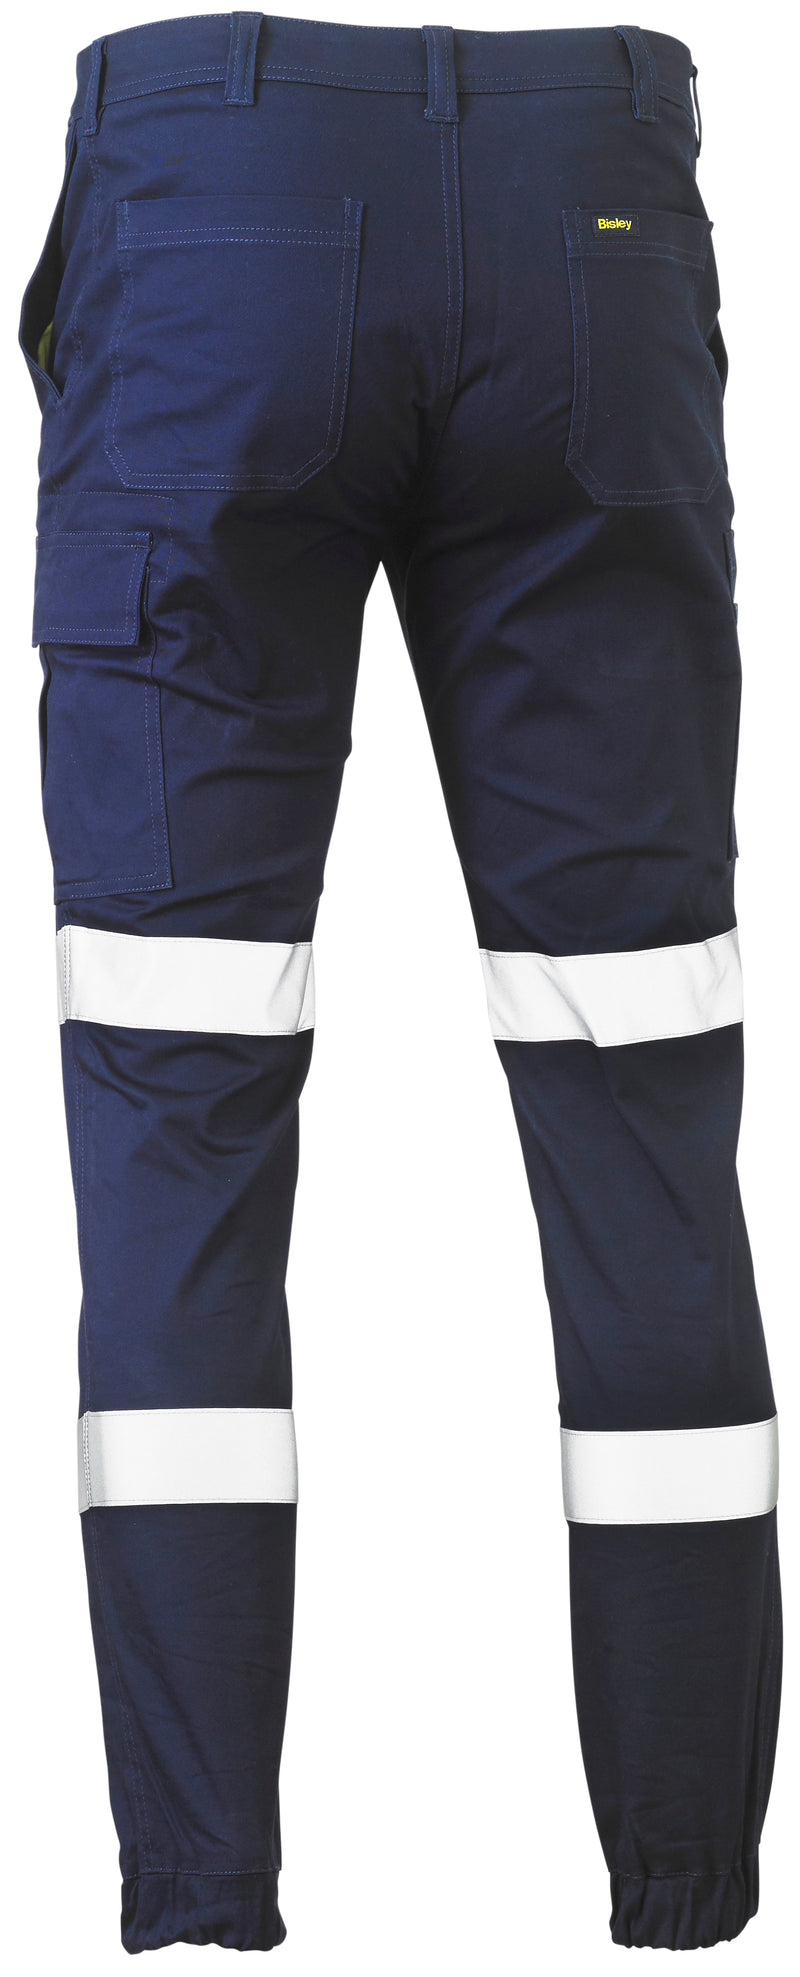 Load image into Gallery viewer, Wholesale BPC6028T Bisley Taped Bimotion Stretch Cotton Drill Cargo Pants - Regular Printed or Blank
